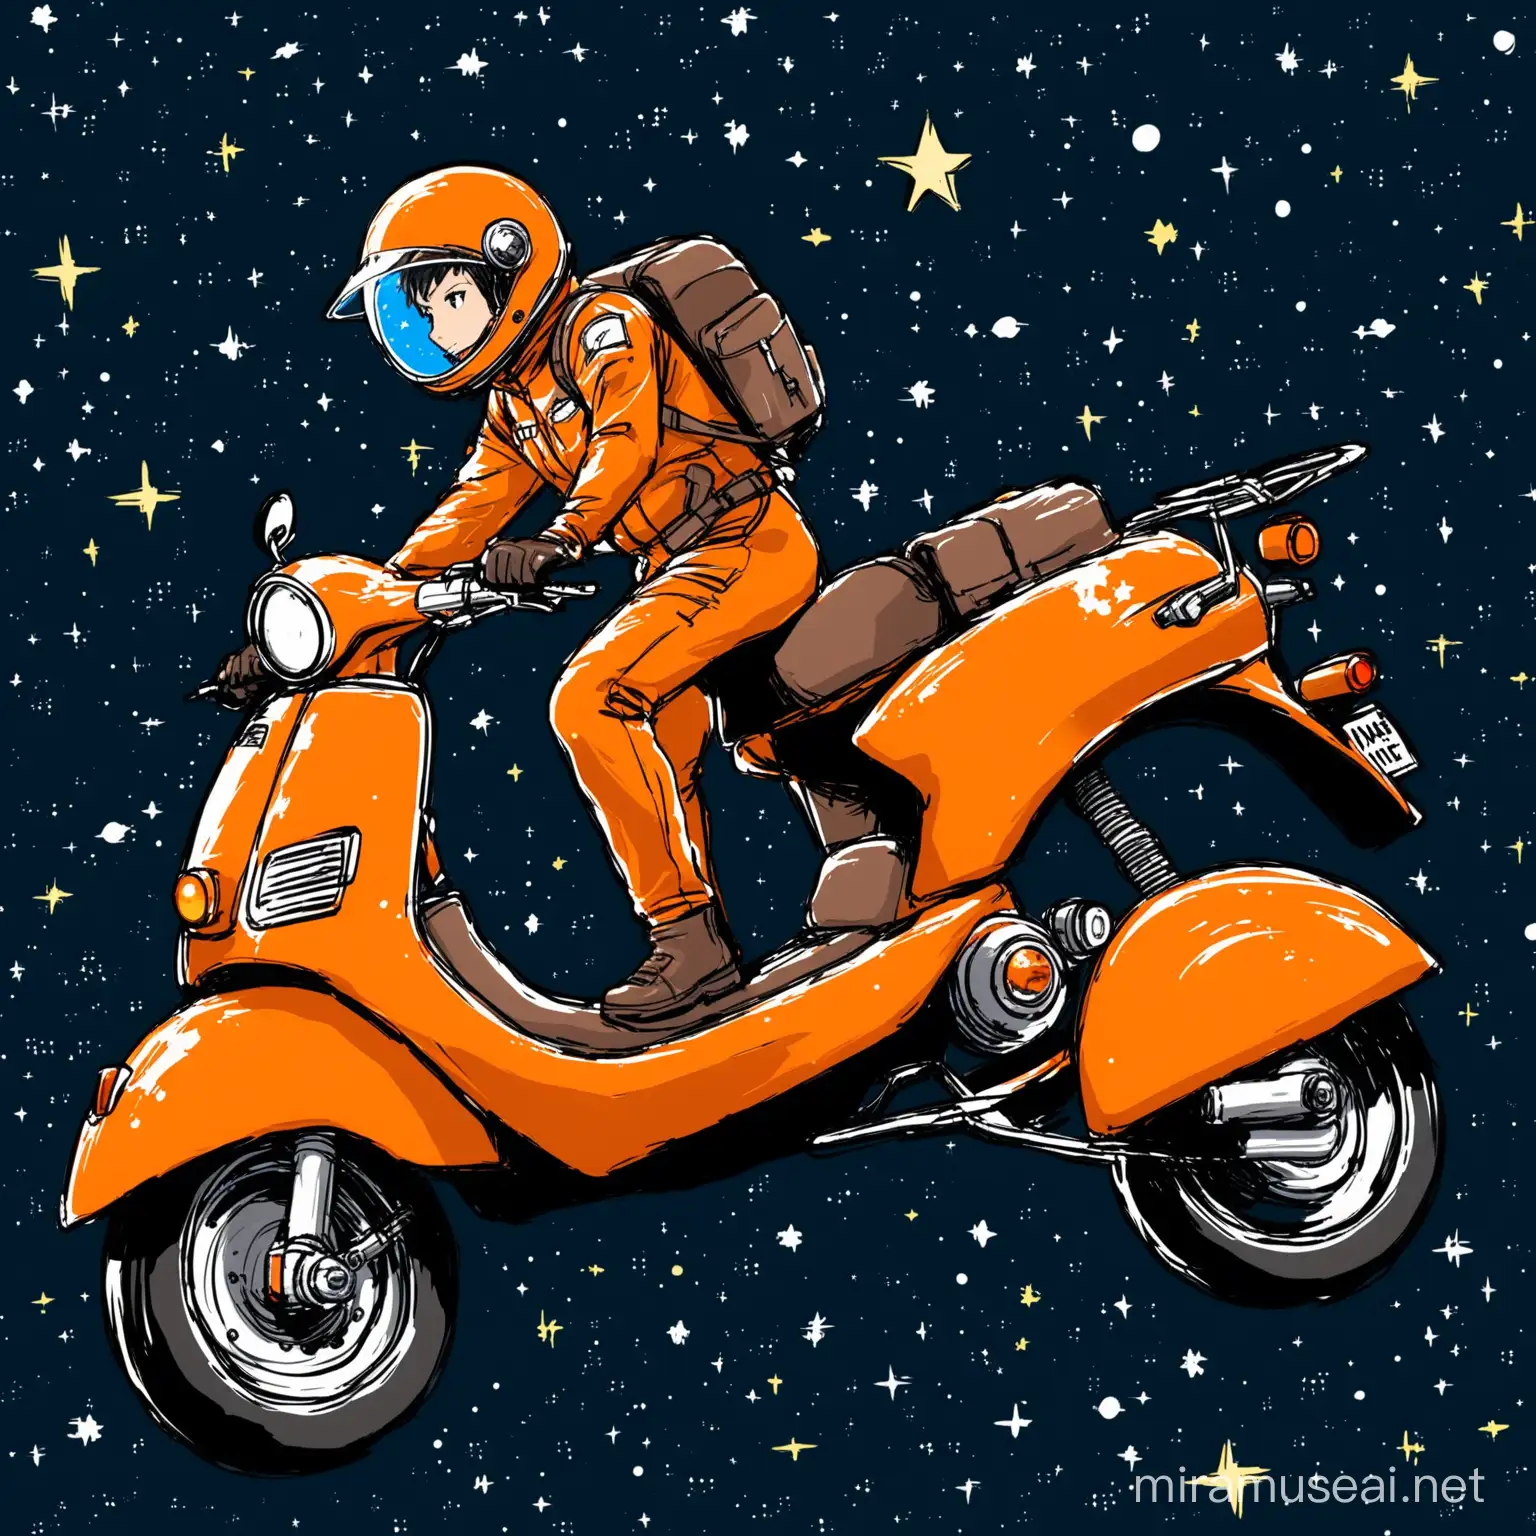 Can you draw me a moto-courier that has orange scooter in a outer space where stars are really bright.